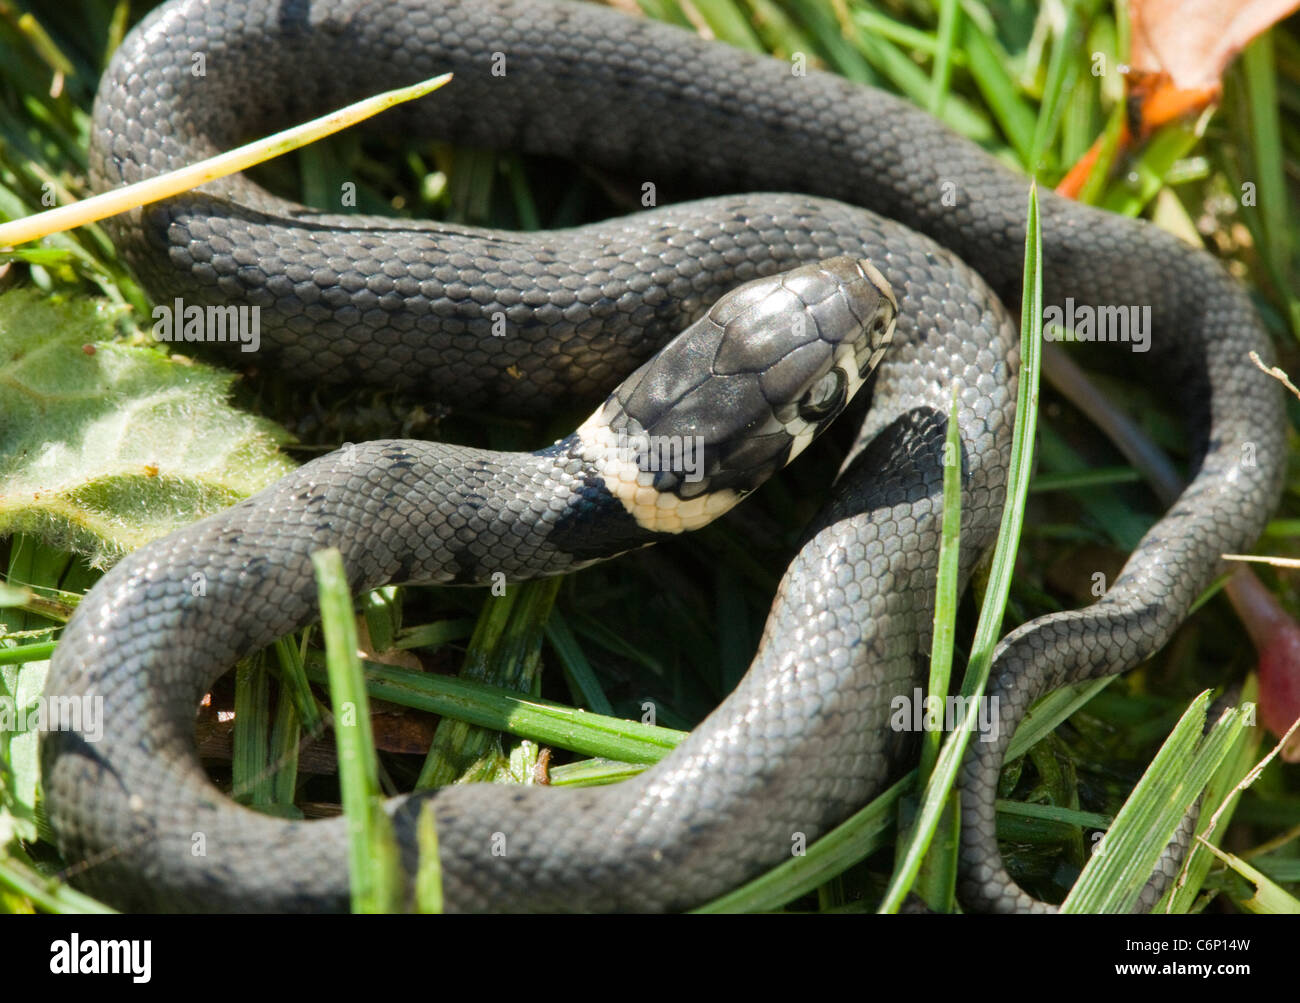 Young grass snake, Natrix natrix, a few hours old. UK. Stock Photo